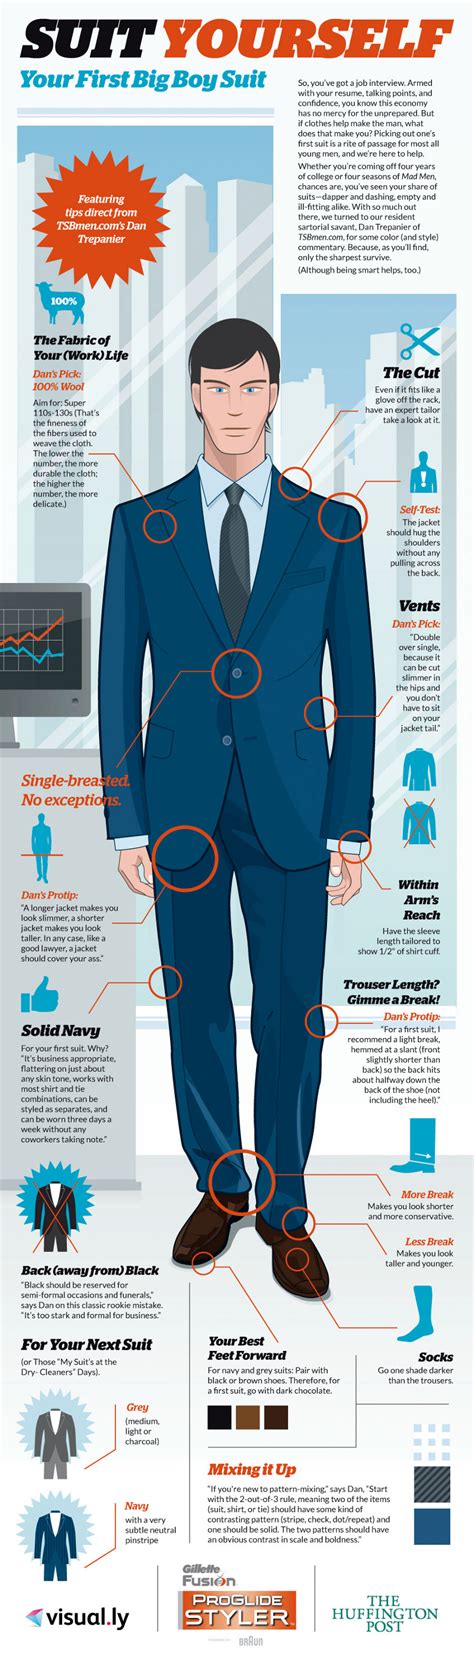 The Best Fabric And Color For Your First Suit